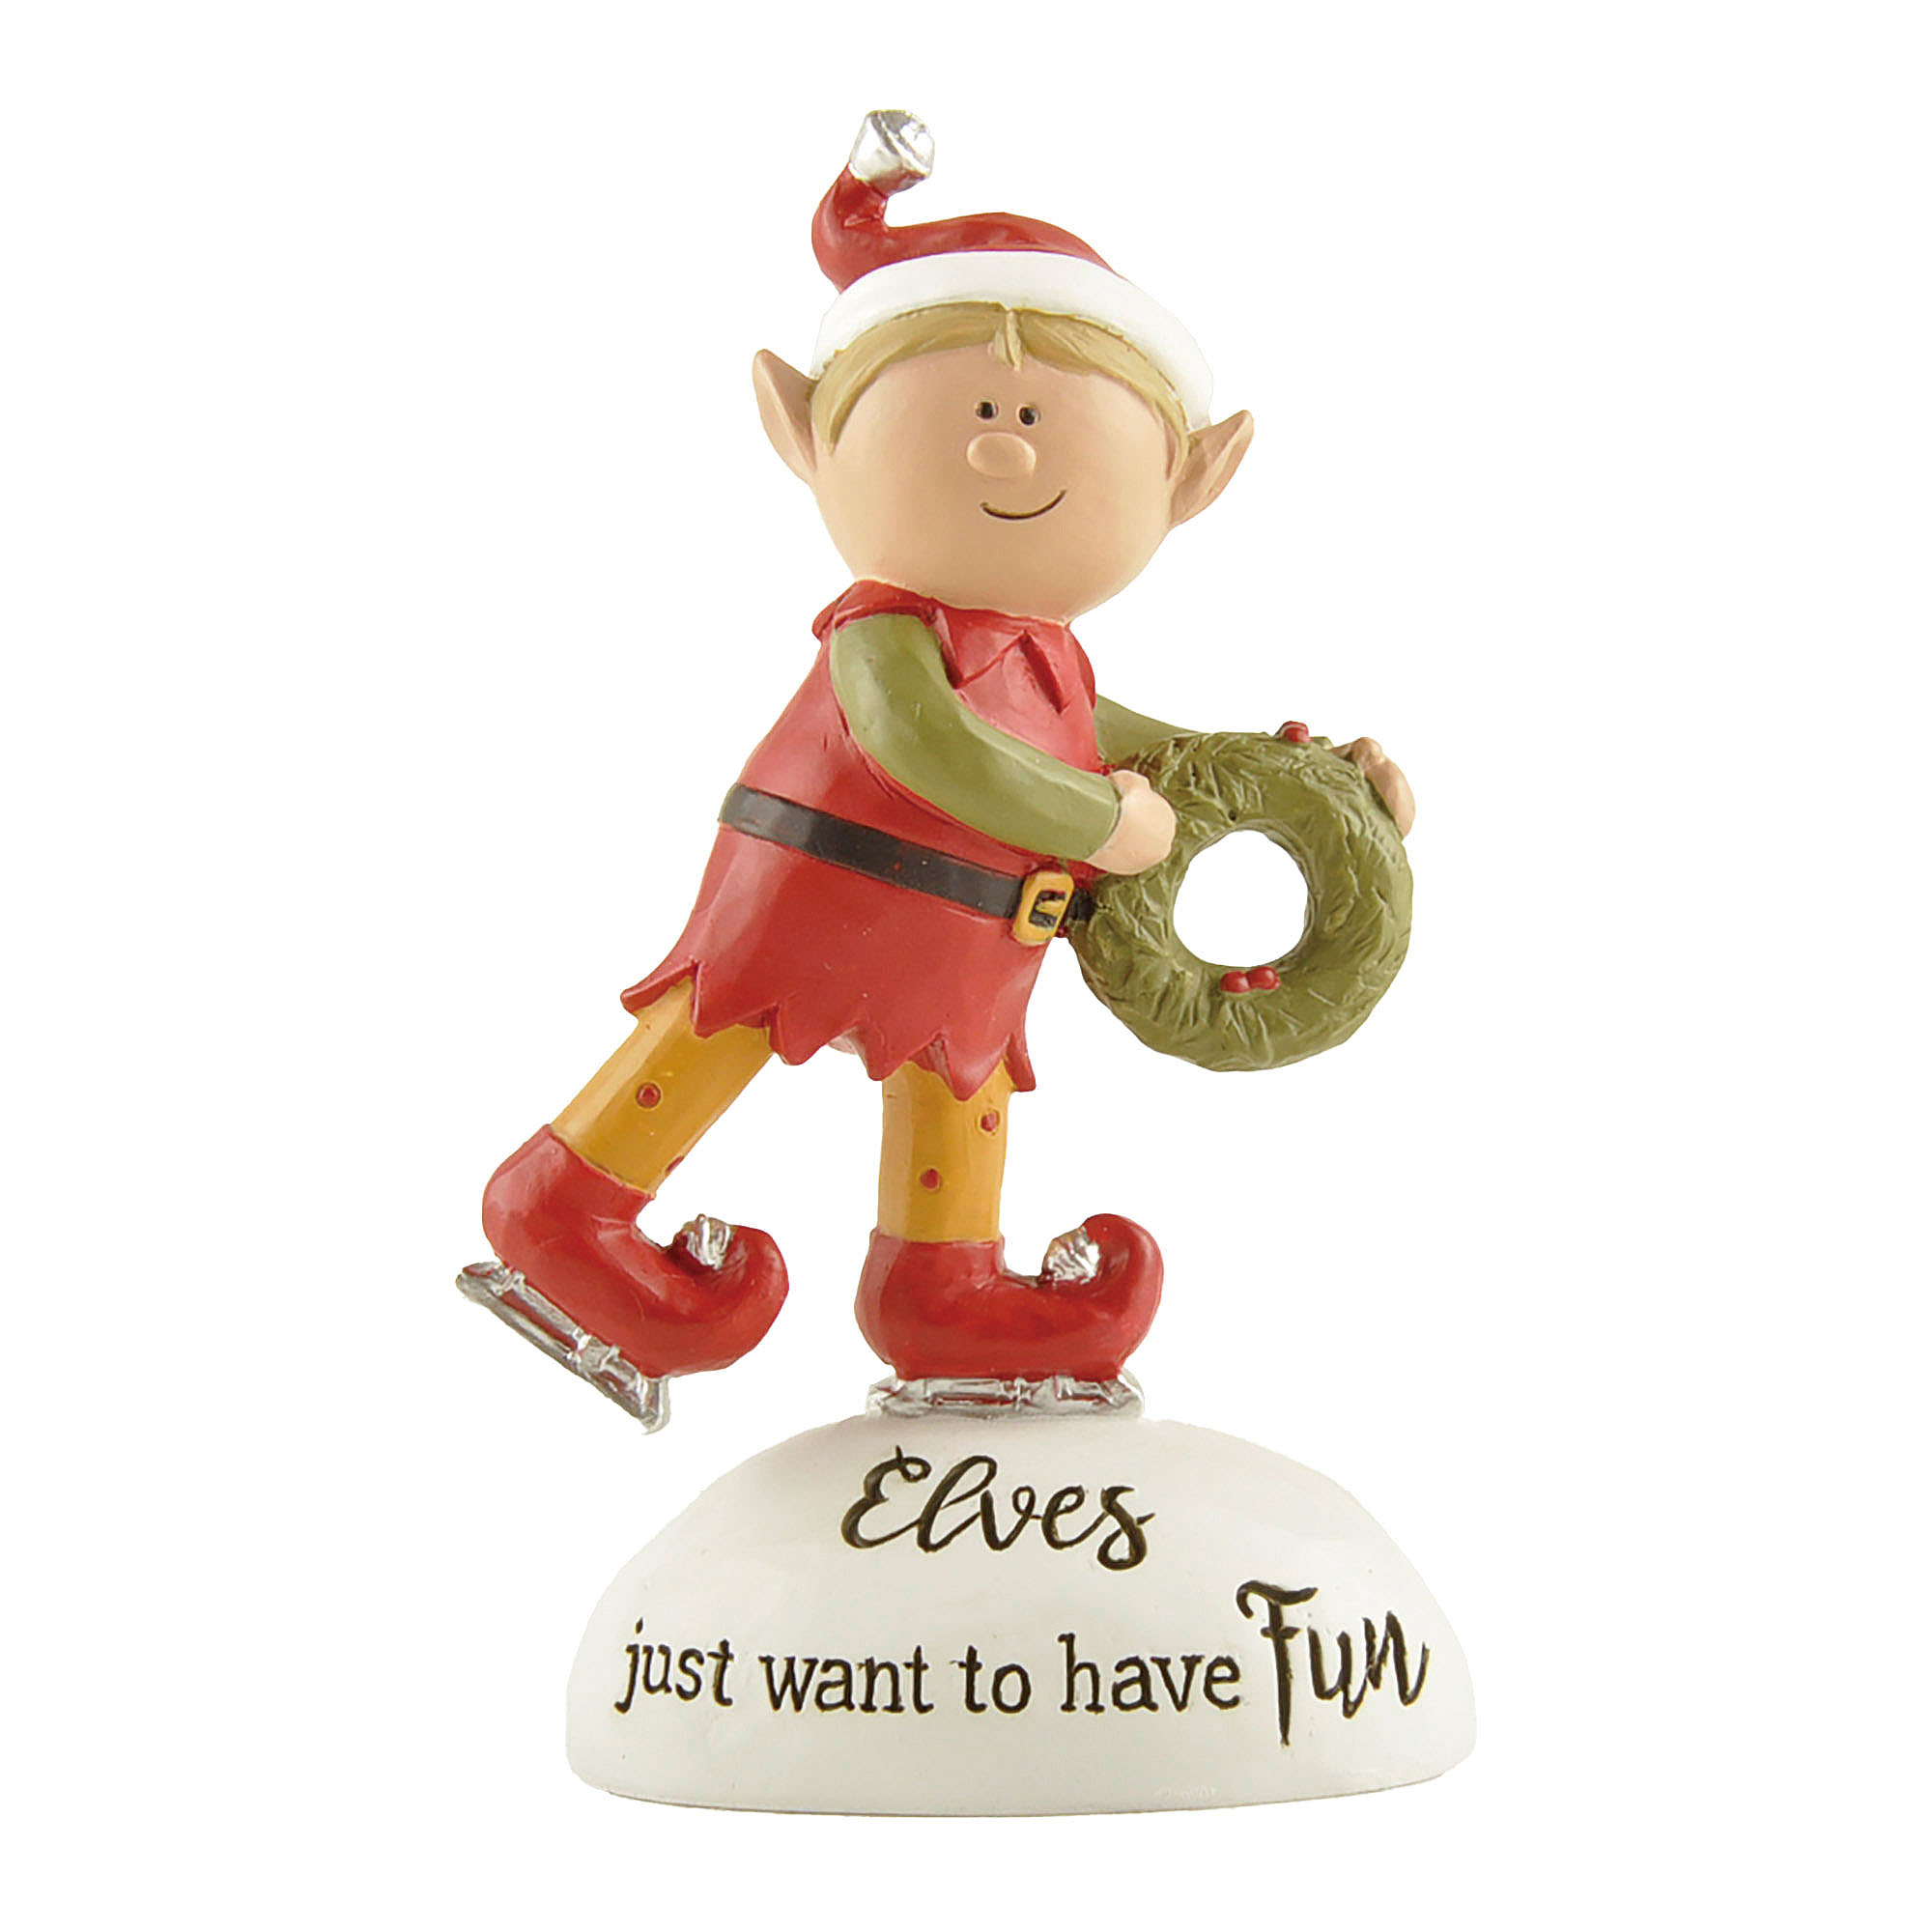 Cheerful Holiday Elf with Christmas Wreath Figurine – 'Elves Just Want to Have Fun' for Festive Home Decor 238-13907